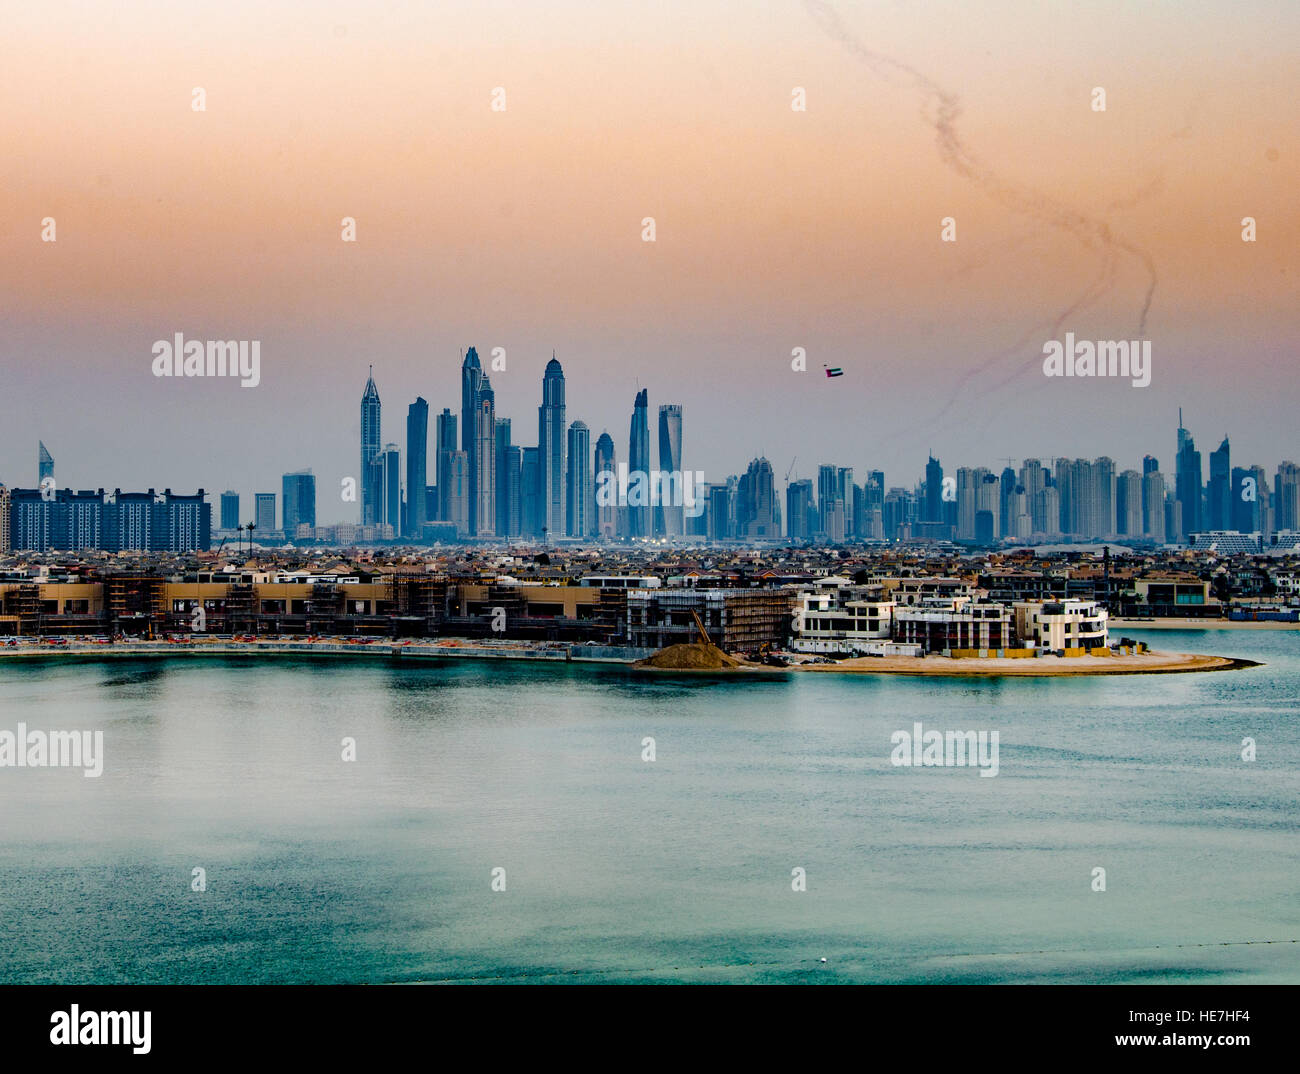 Sunset over Dubai on UAE flag day with a biplane flying the UAE flag in the sky Stock Photo